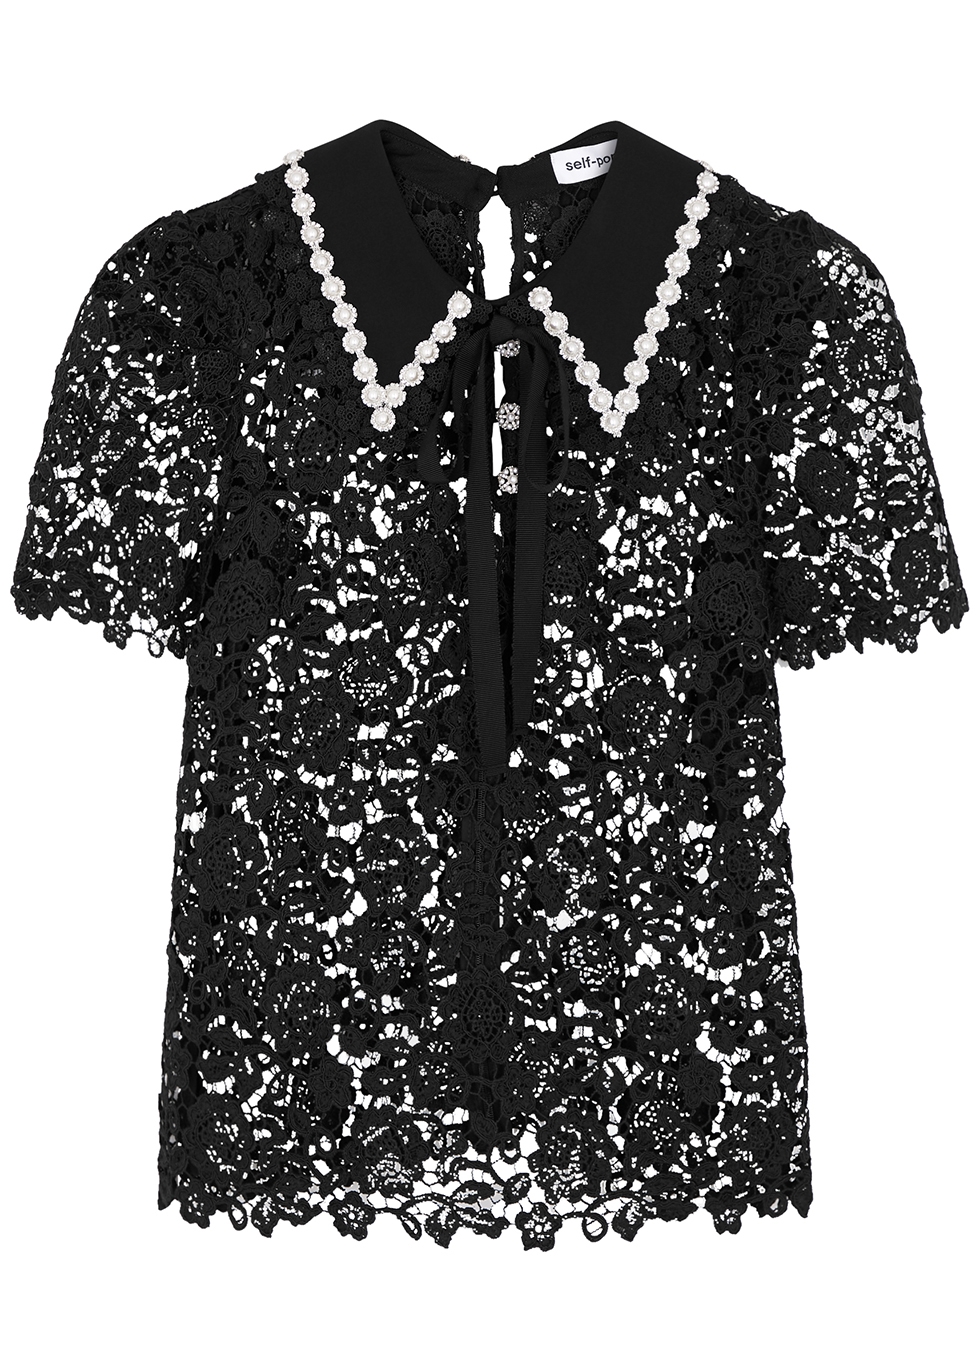 Black embellished guipure lace top